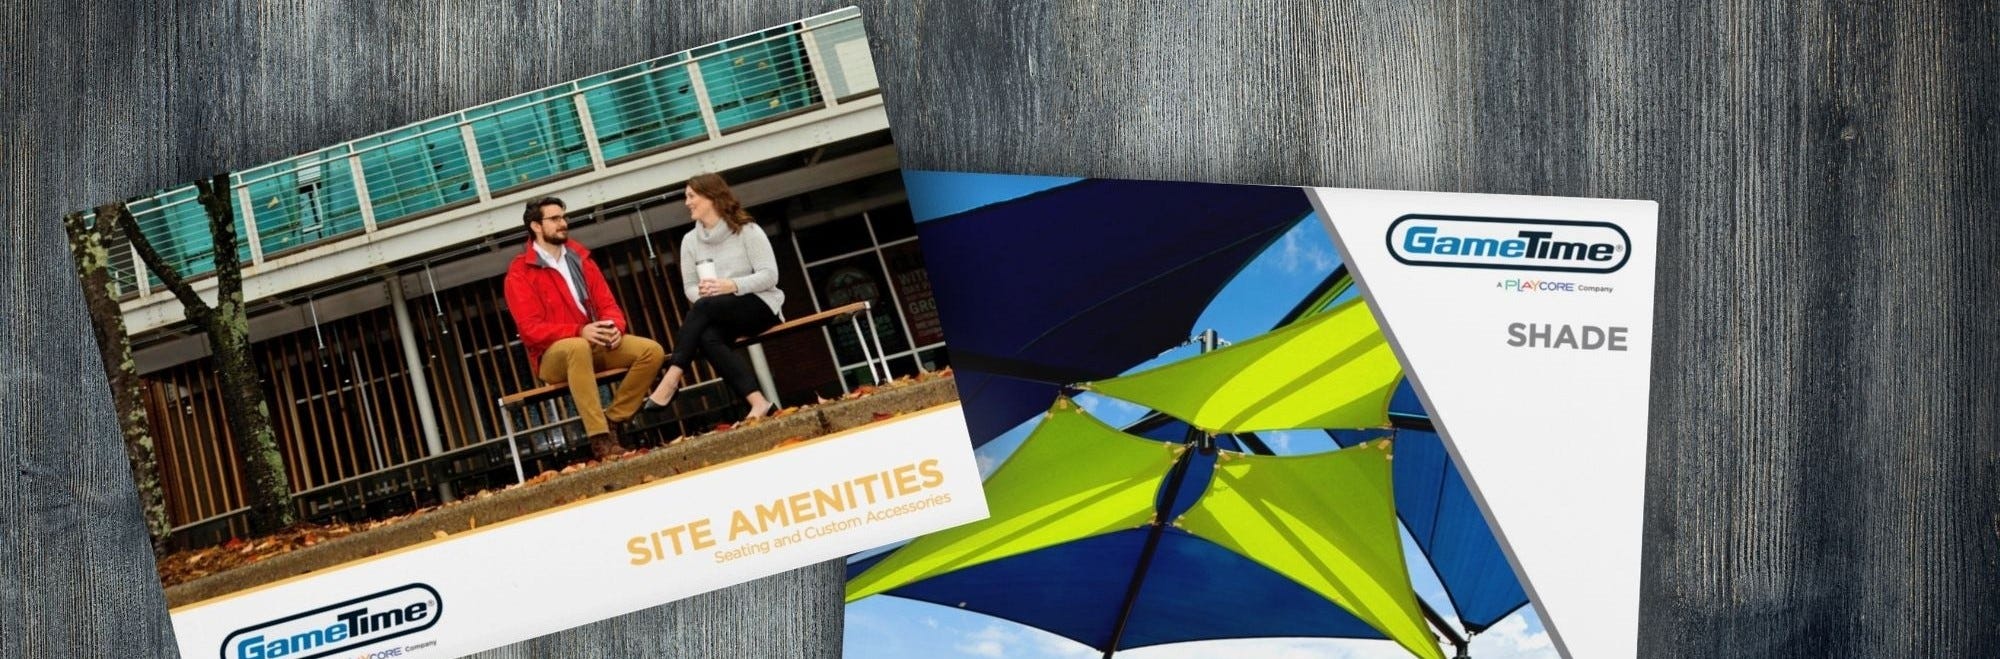 GameTime Releases 2021 Site Amenities and Shade Catalogs